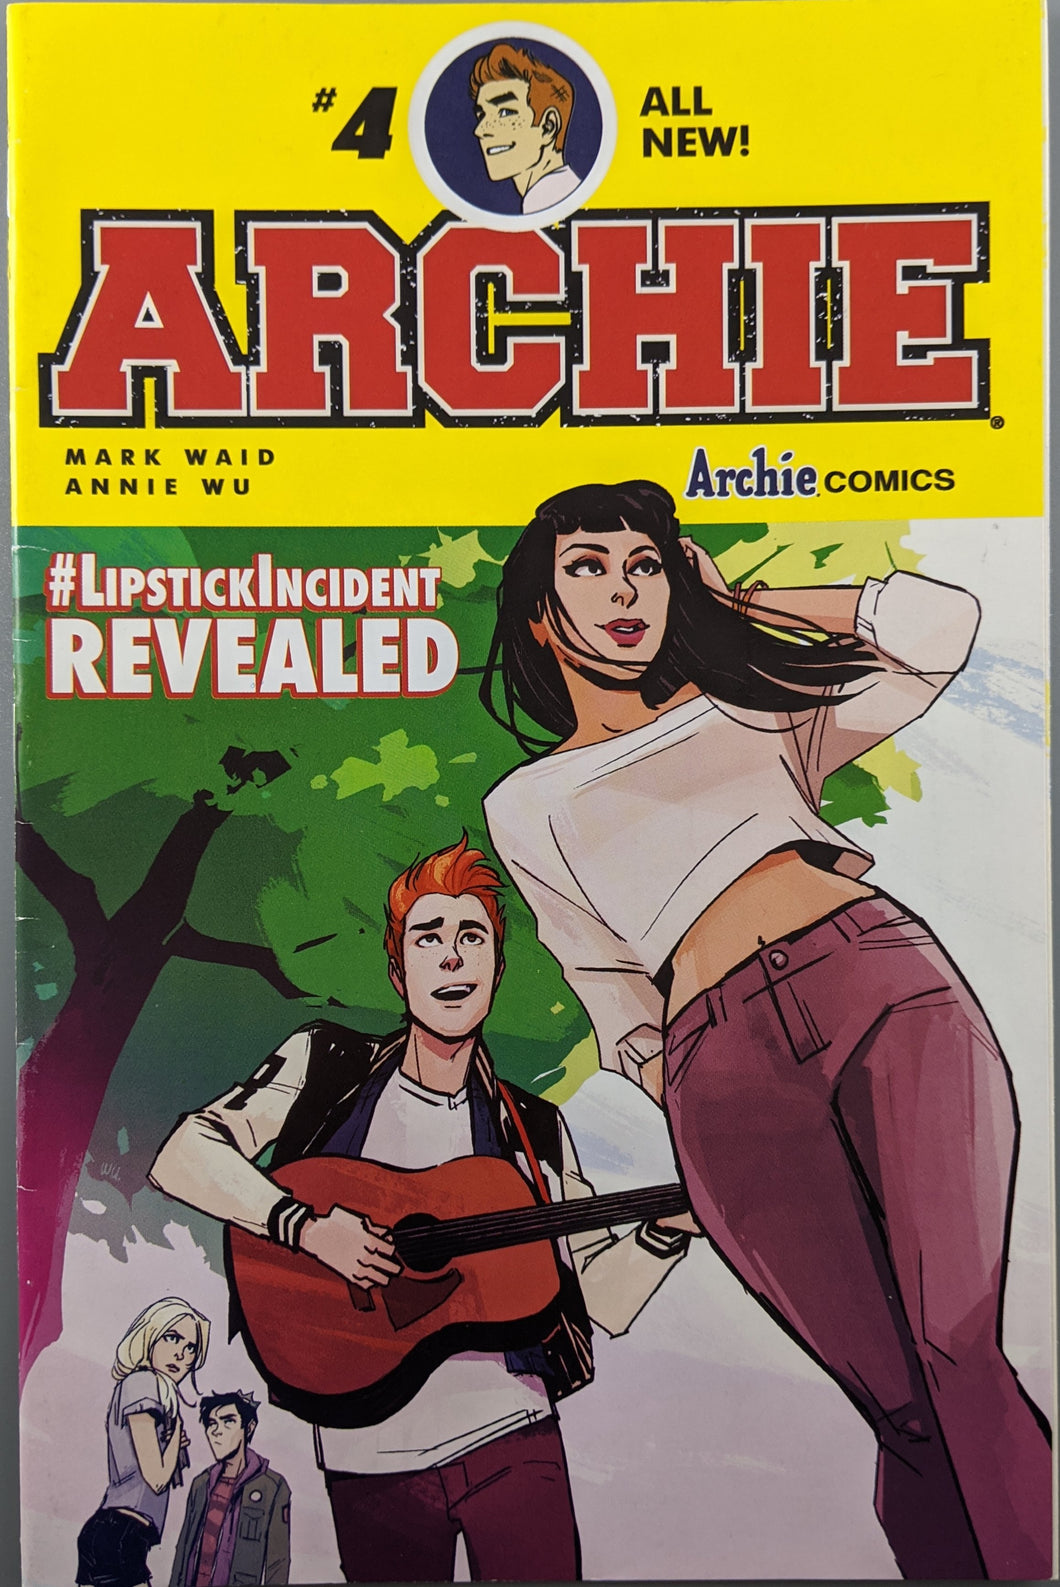 Archie (2015) #4 Cover A (Wu)